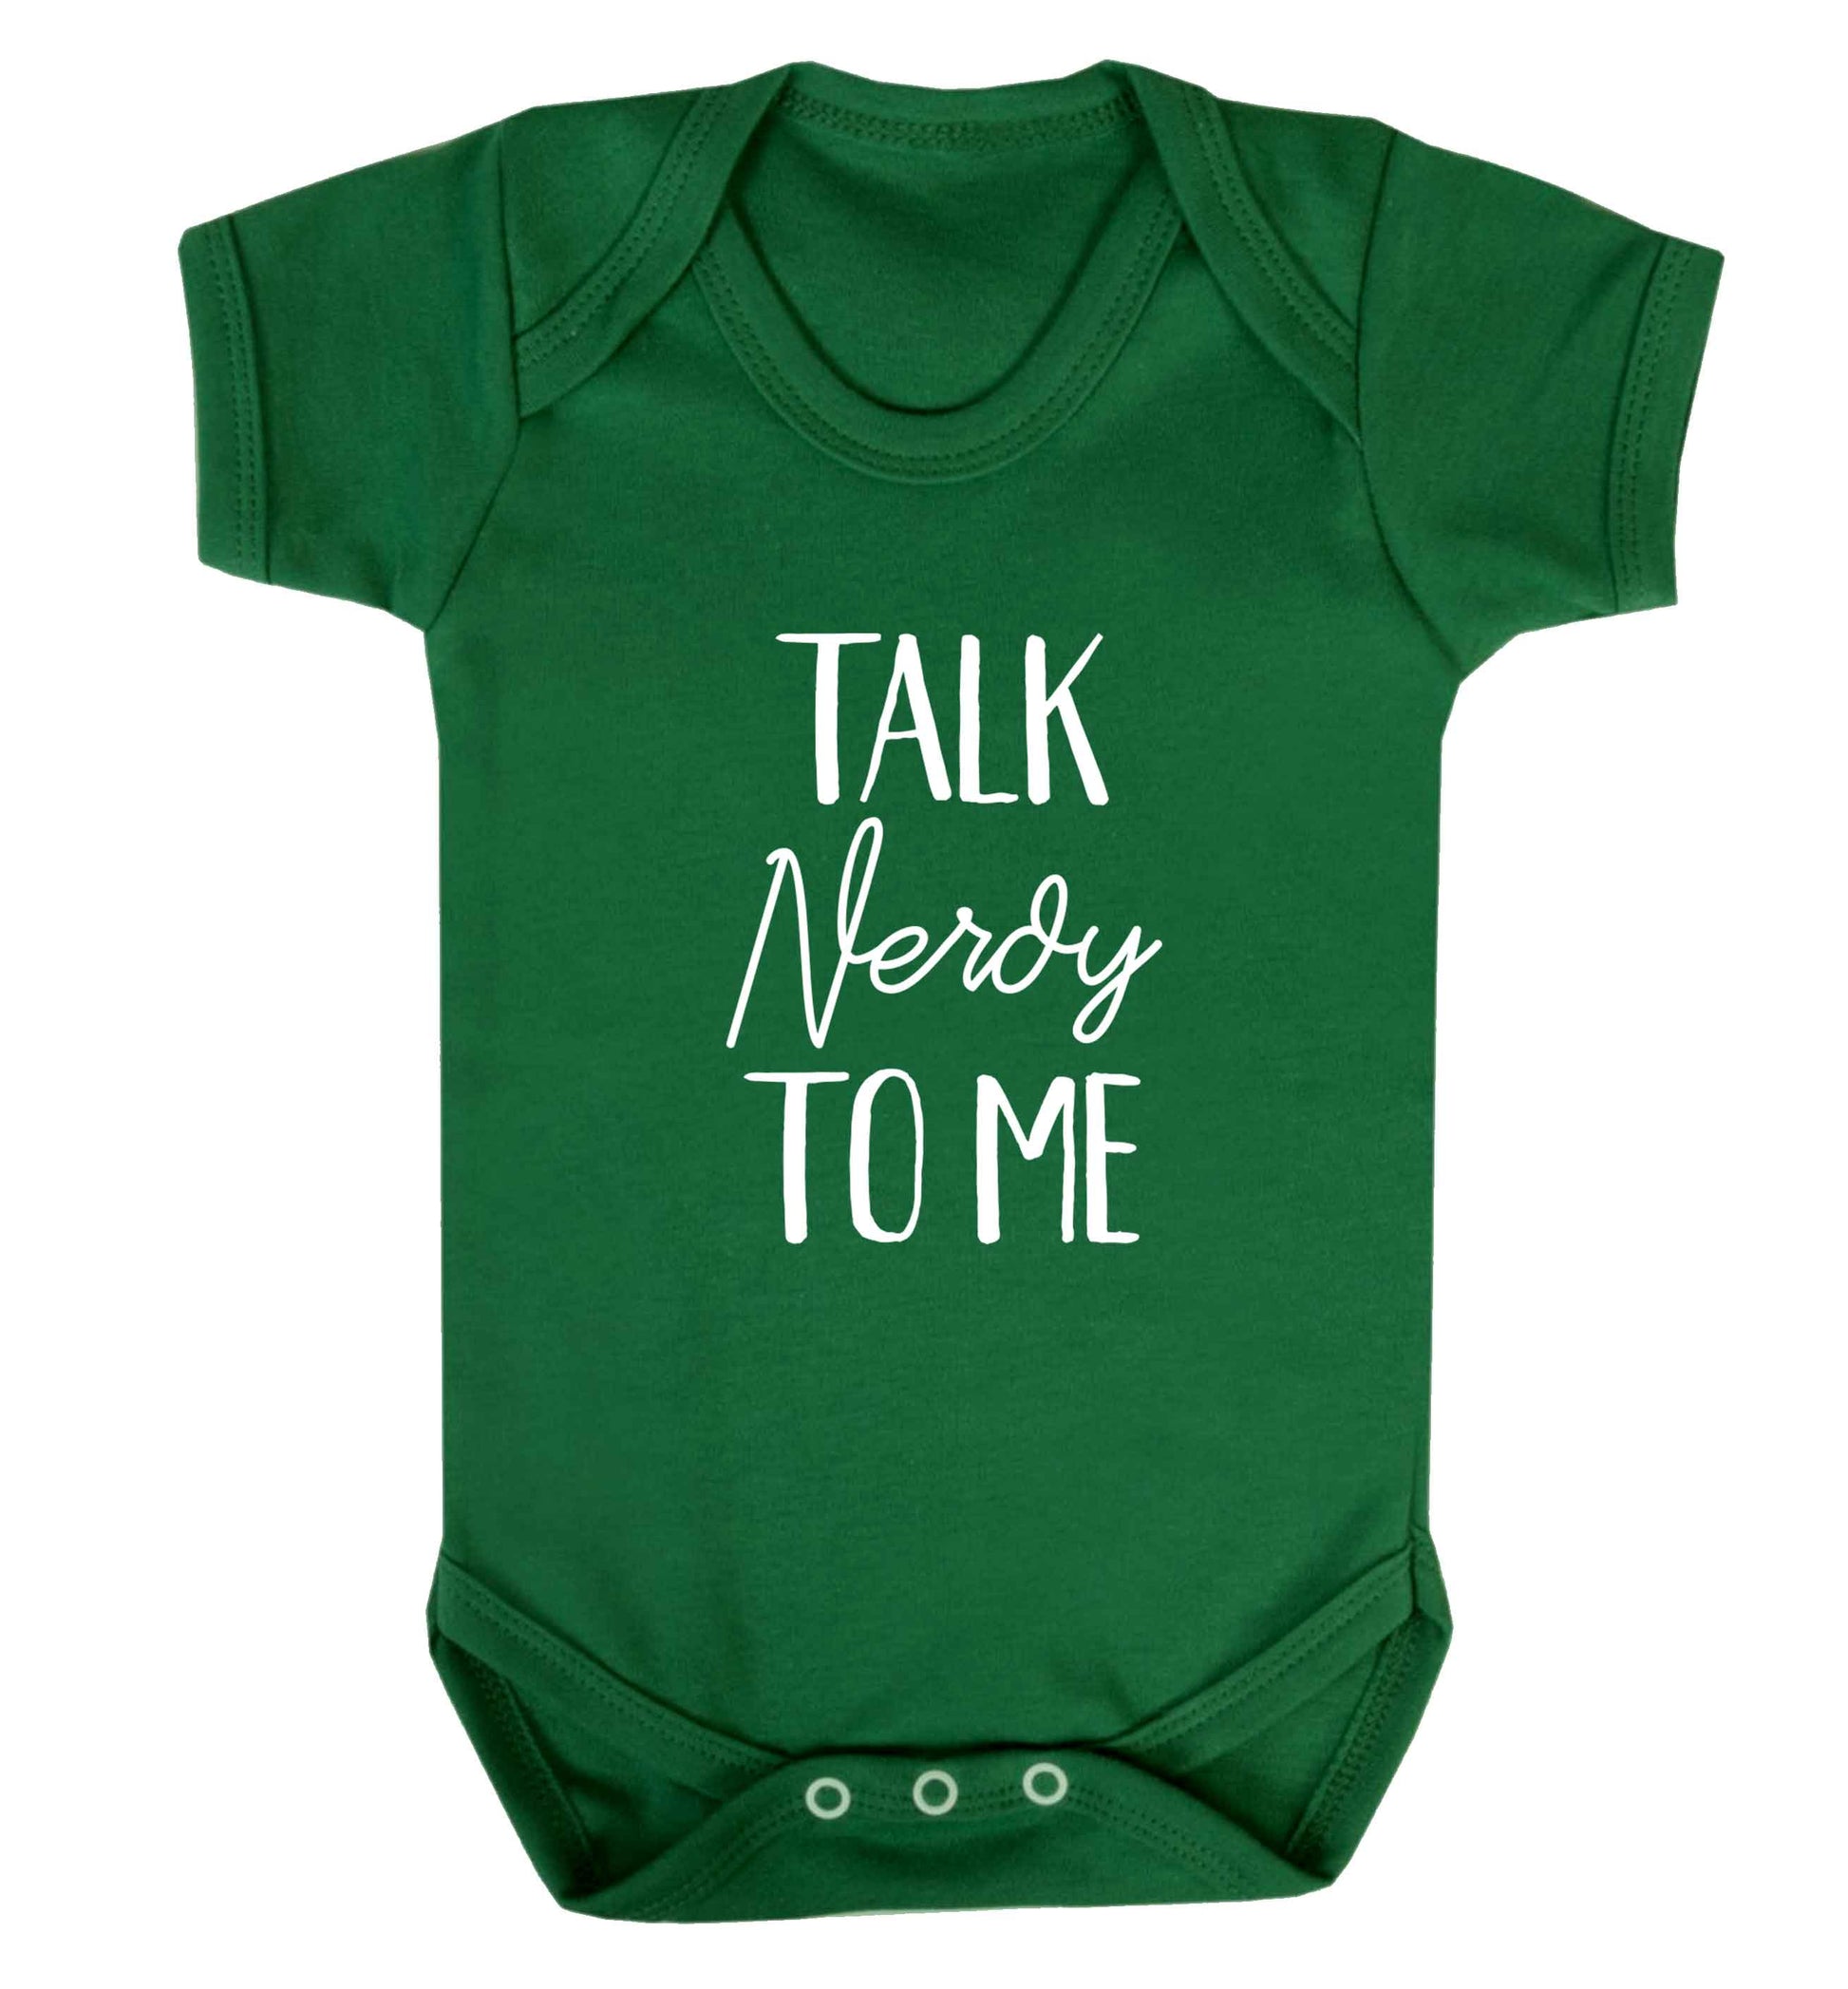 Talk nerdy to me baby vest green 18-24 months